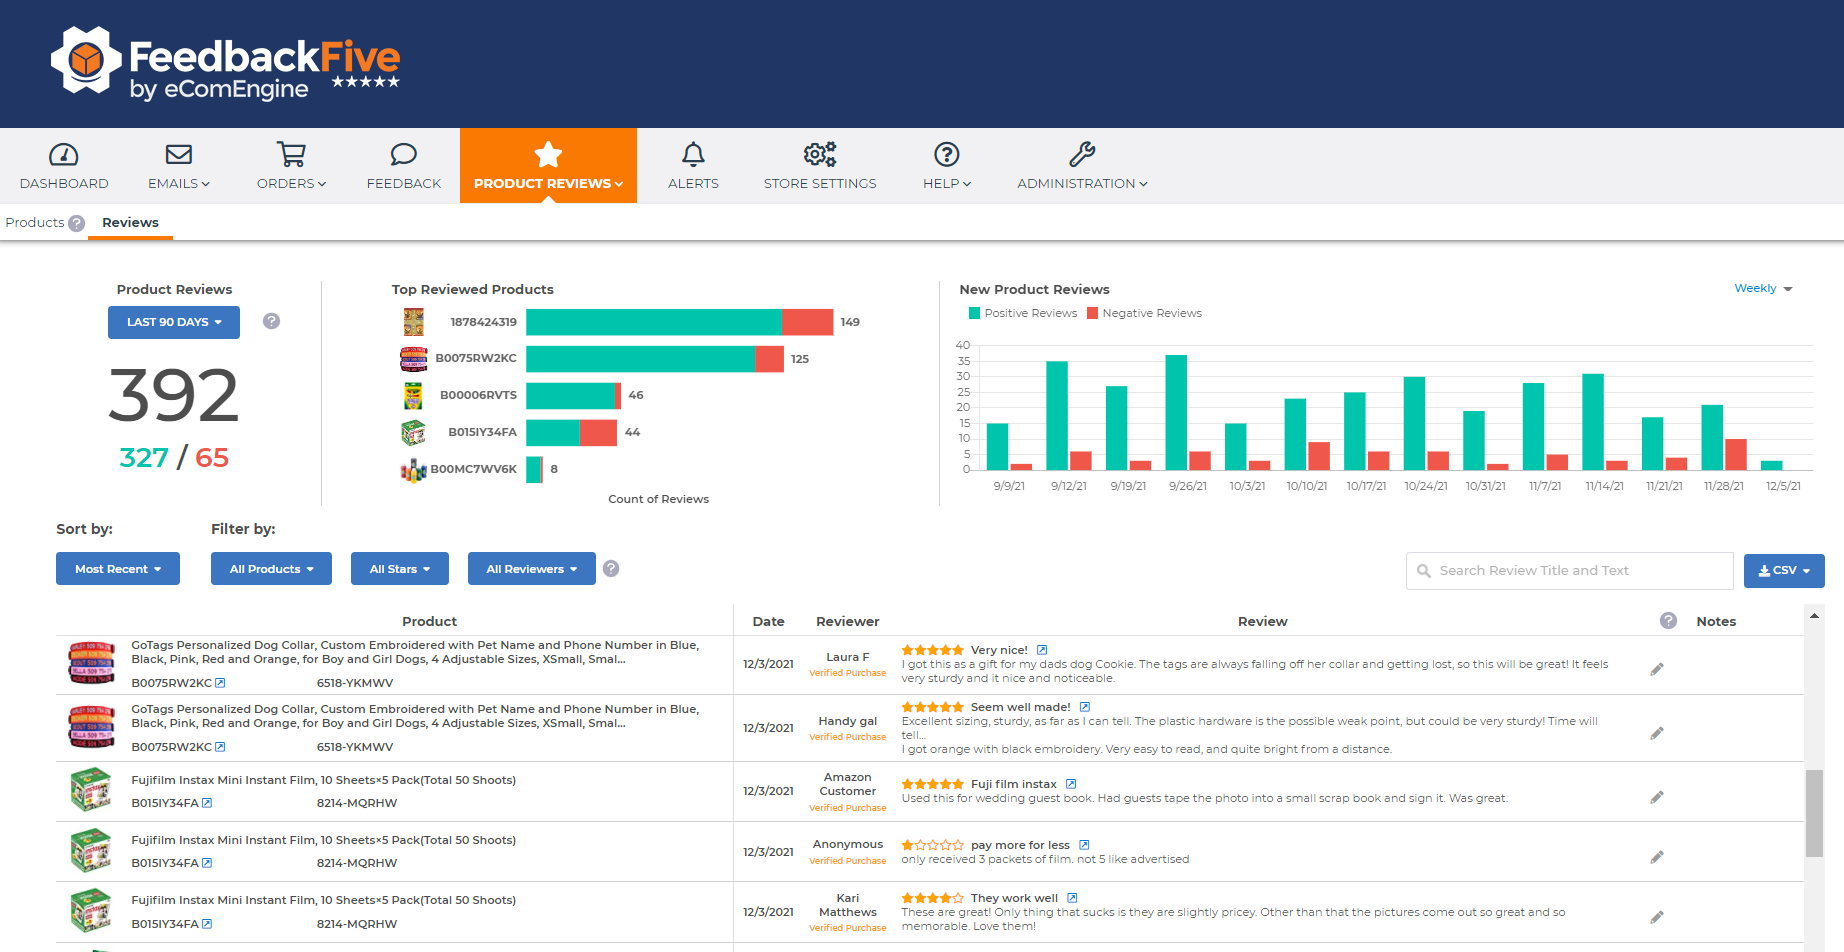 Product reviews page in FeedbackFive